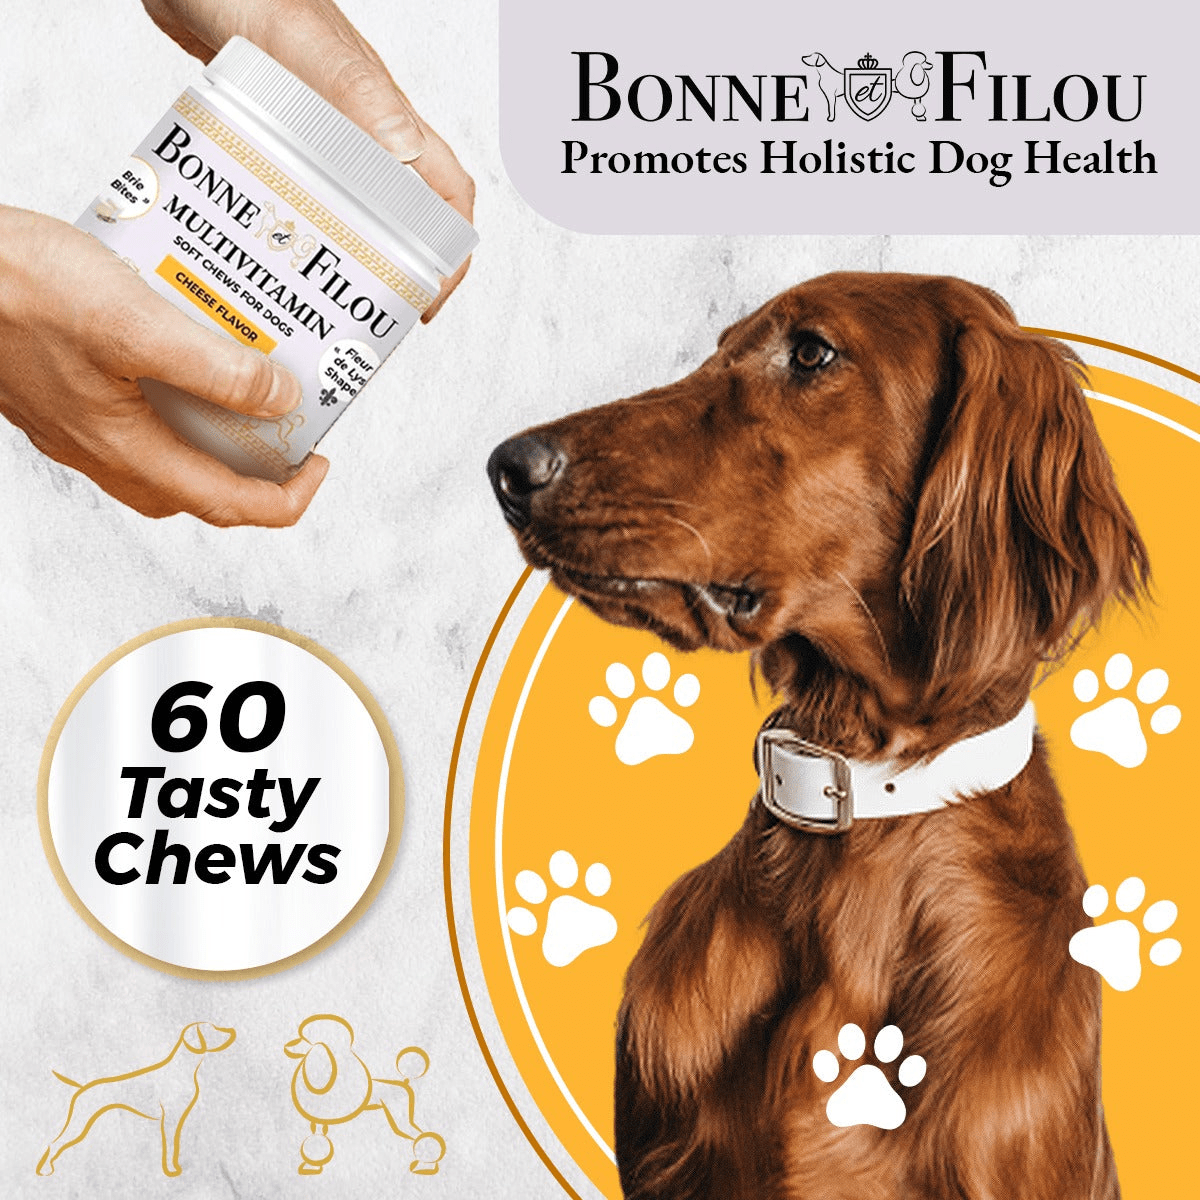 Dog and Pet Stuff Cheese Flavor "Brie Bites" Multivitamin Soft Chews for Dogs (Cheese Flavor - 60 chews)